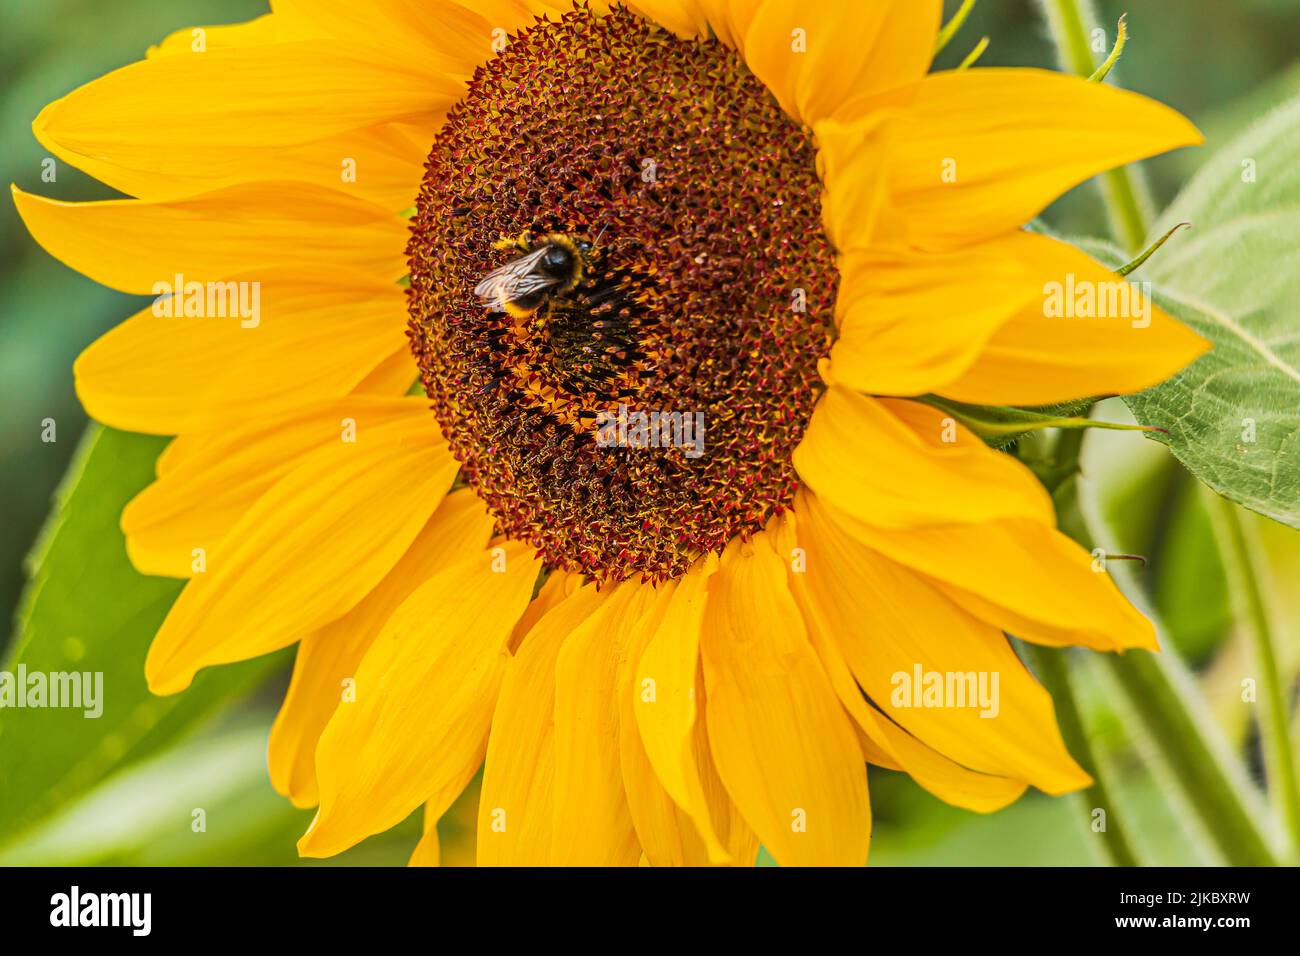 Detail of a large sunflower in bloom. rich yellow leaves of an open flower. Single bee on sunflower seed in center of flower. Green leaves of sunflowe Stock Photo